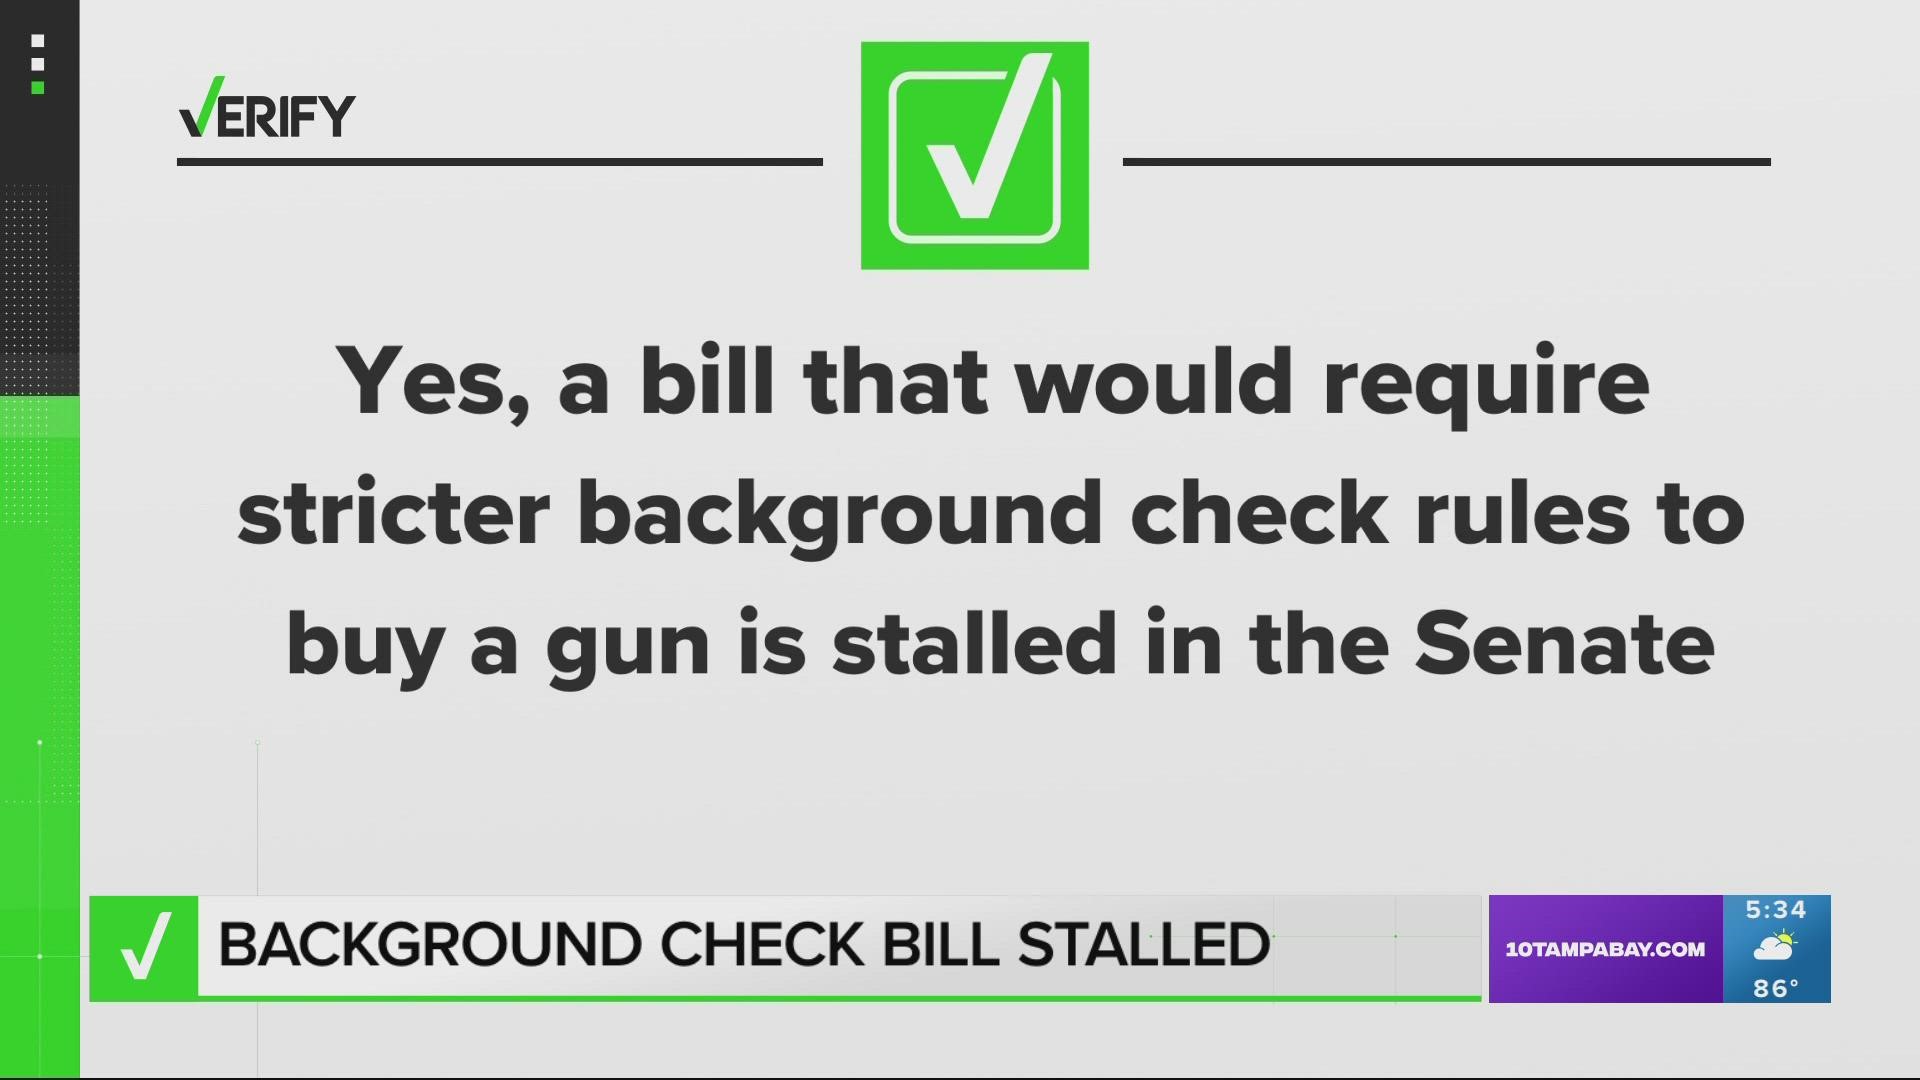 Golden State Warriors coach Steve Kerr called on U.S. senators to pass H.R. 8 after the deadly school shooting in Texas. Here’s where the bill stands right now.